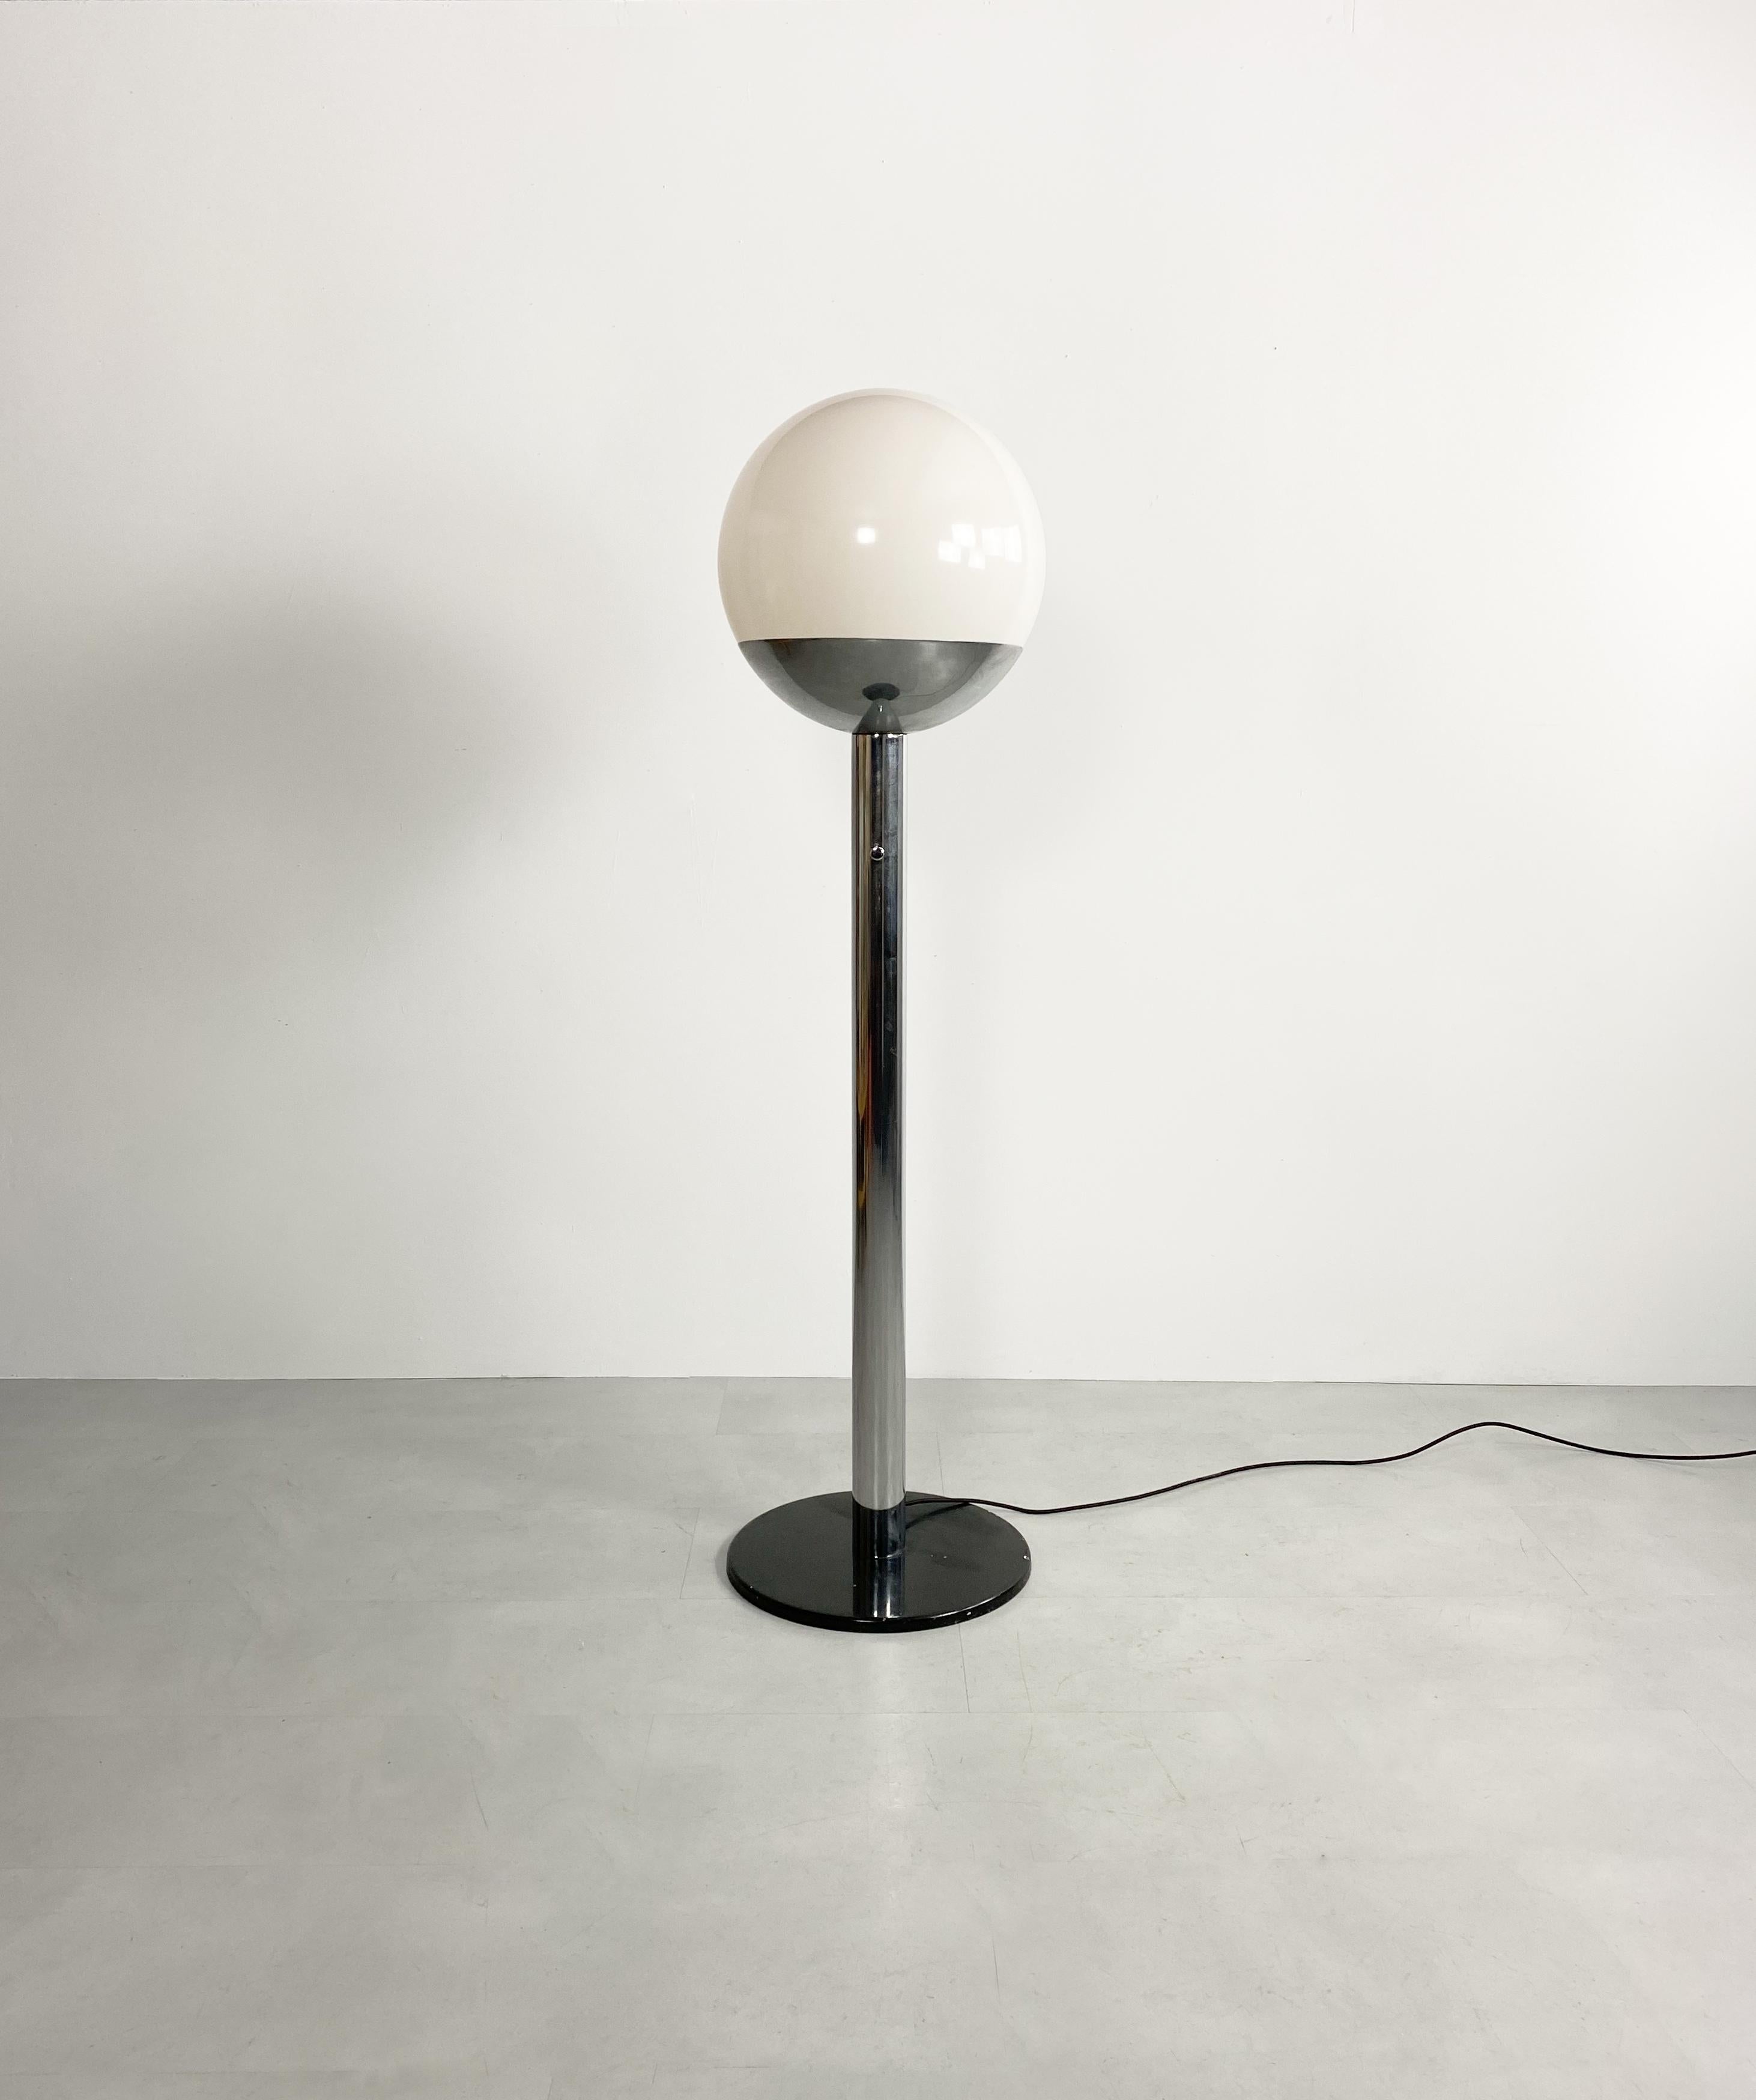 Space Age Globe Floor Lamp by Pia Guidetti Crippa for Luci, Italy, c.1970